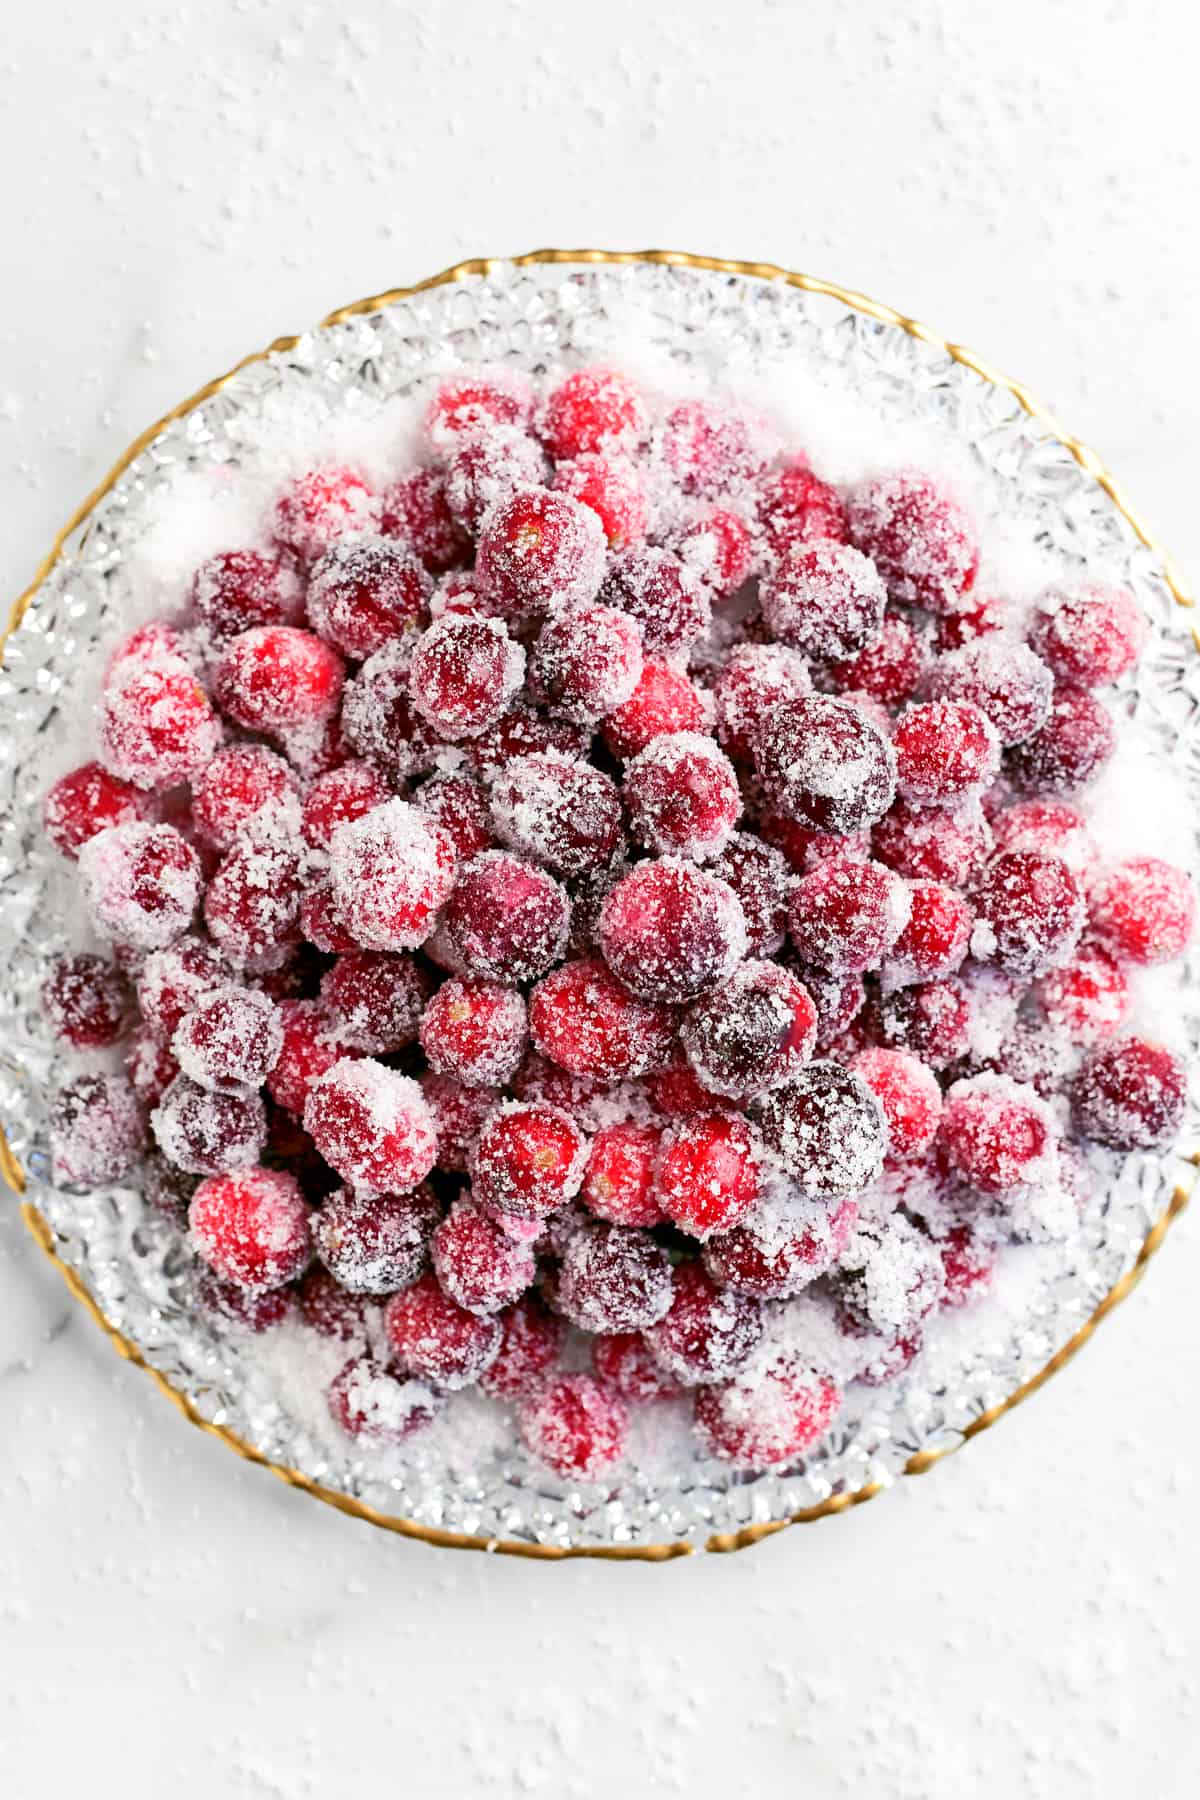 many sugar coated cranberries on a plate